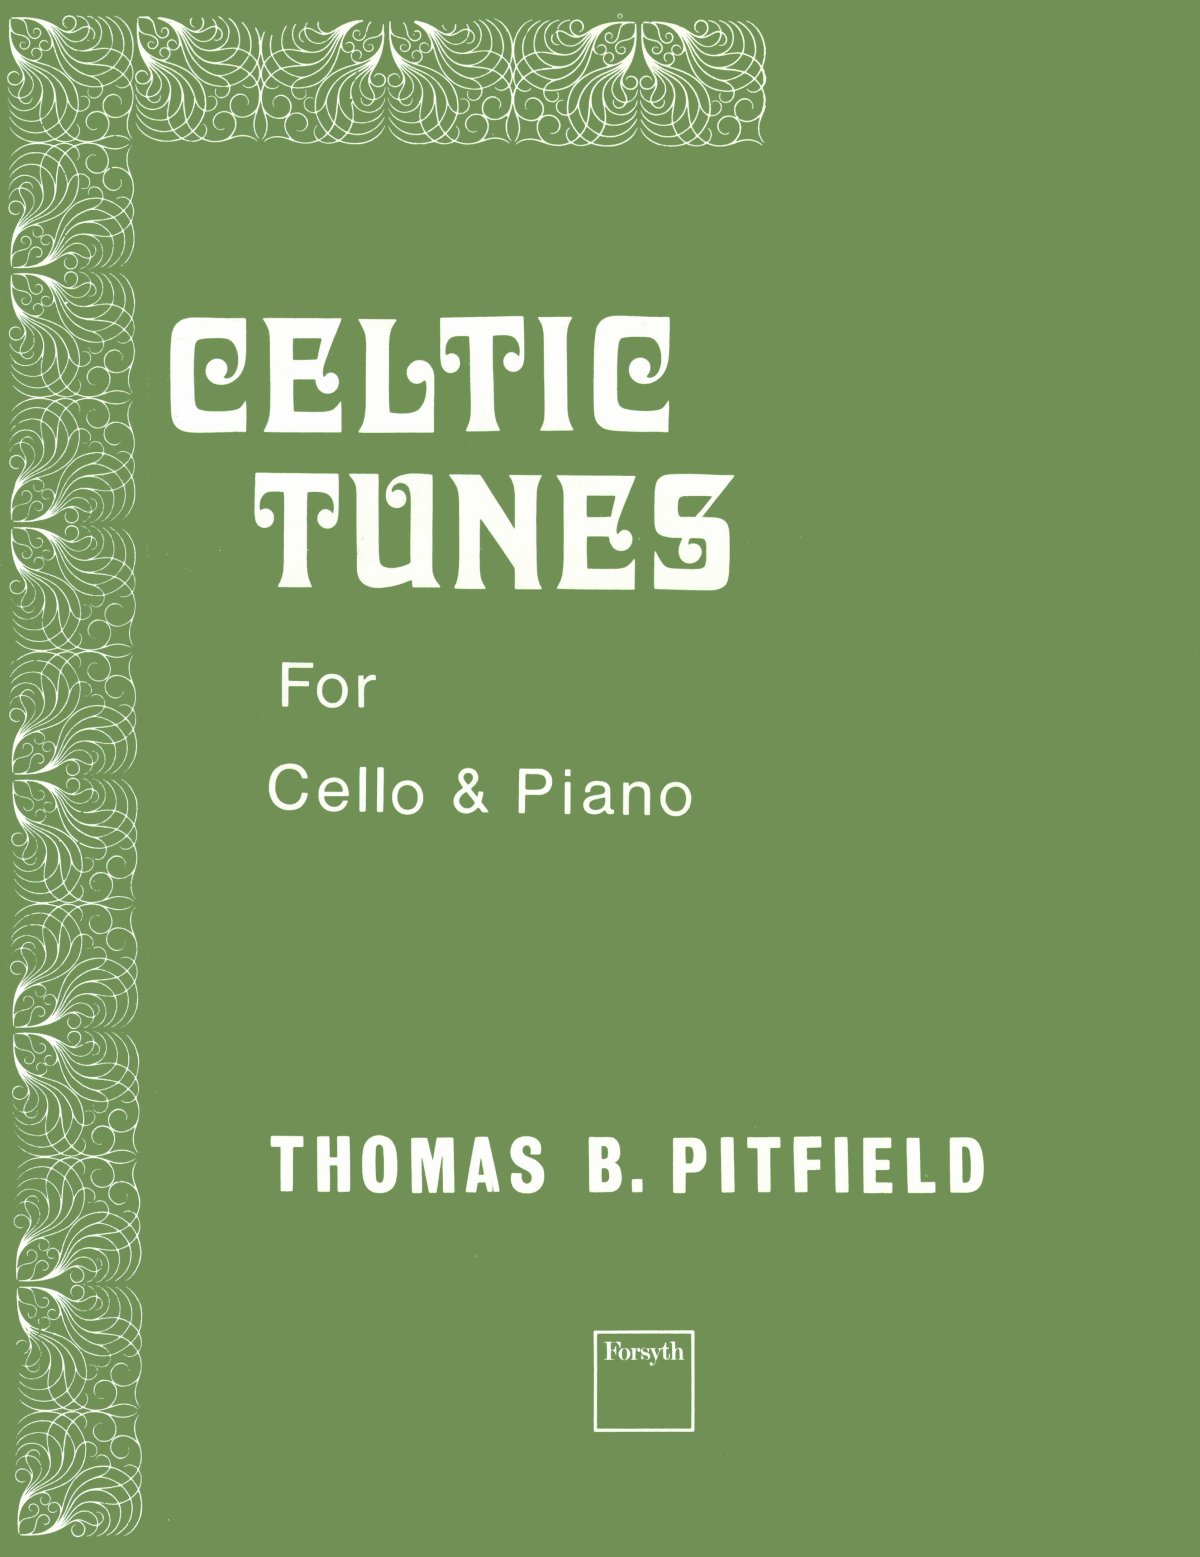 Celtic Tunes Pitfield Cello Sheet Music Songbook